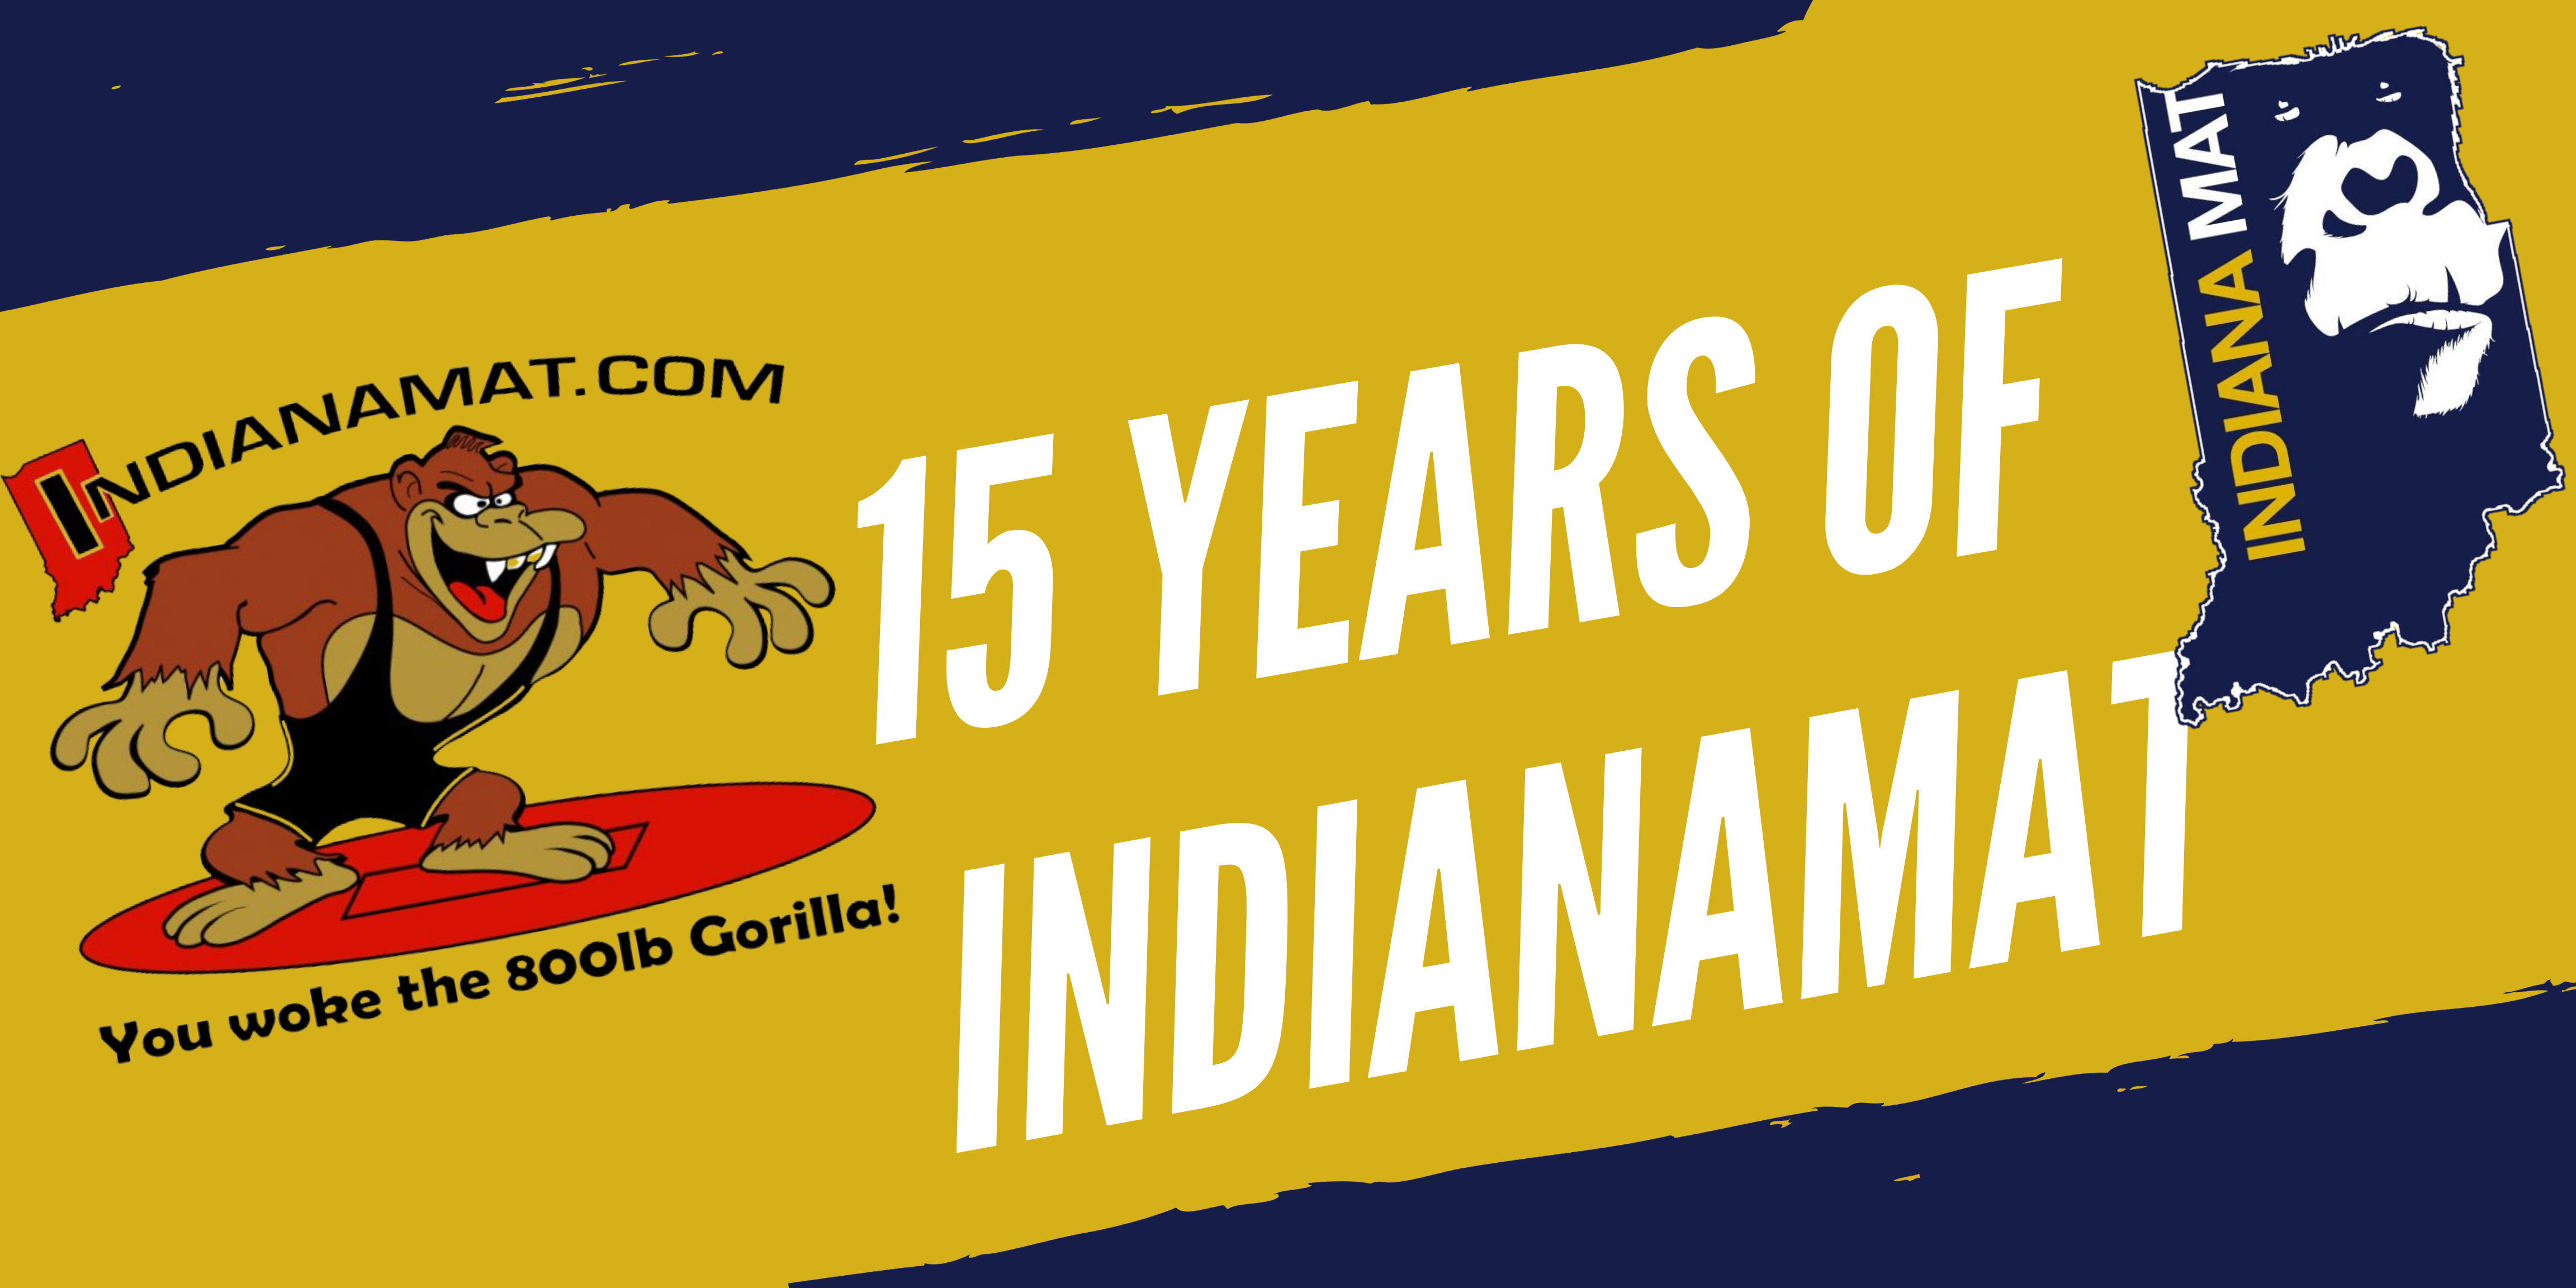 More information about "15 Years of IndianaMat"